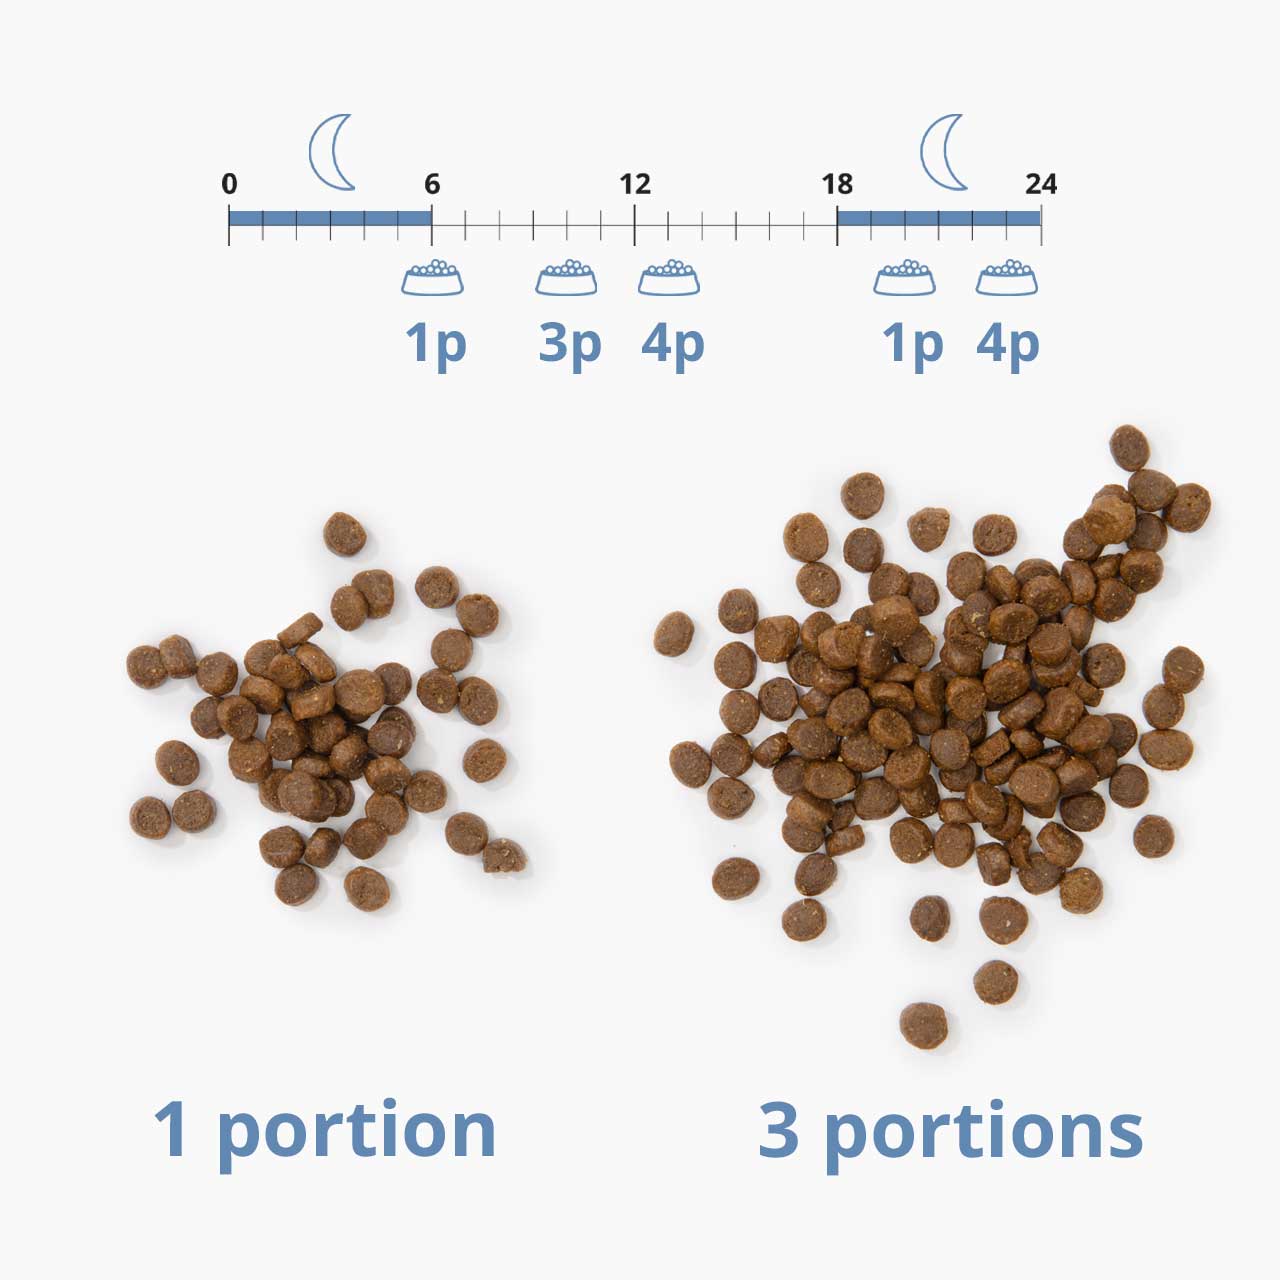 Set the number of portions for each meal